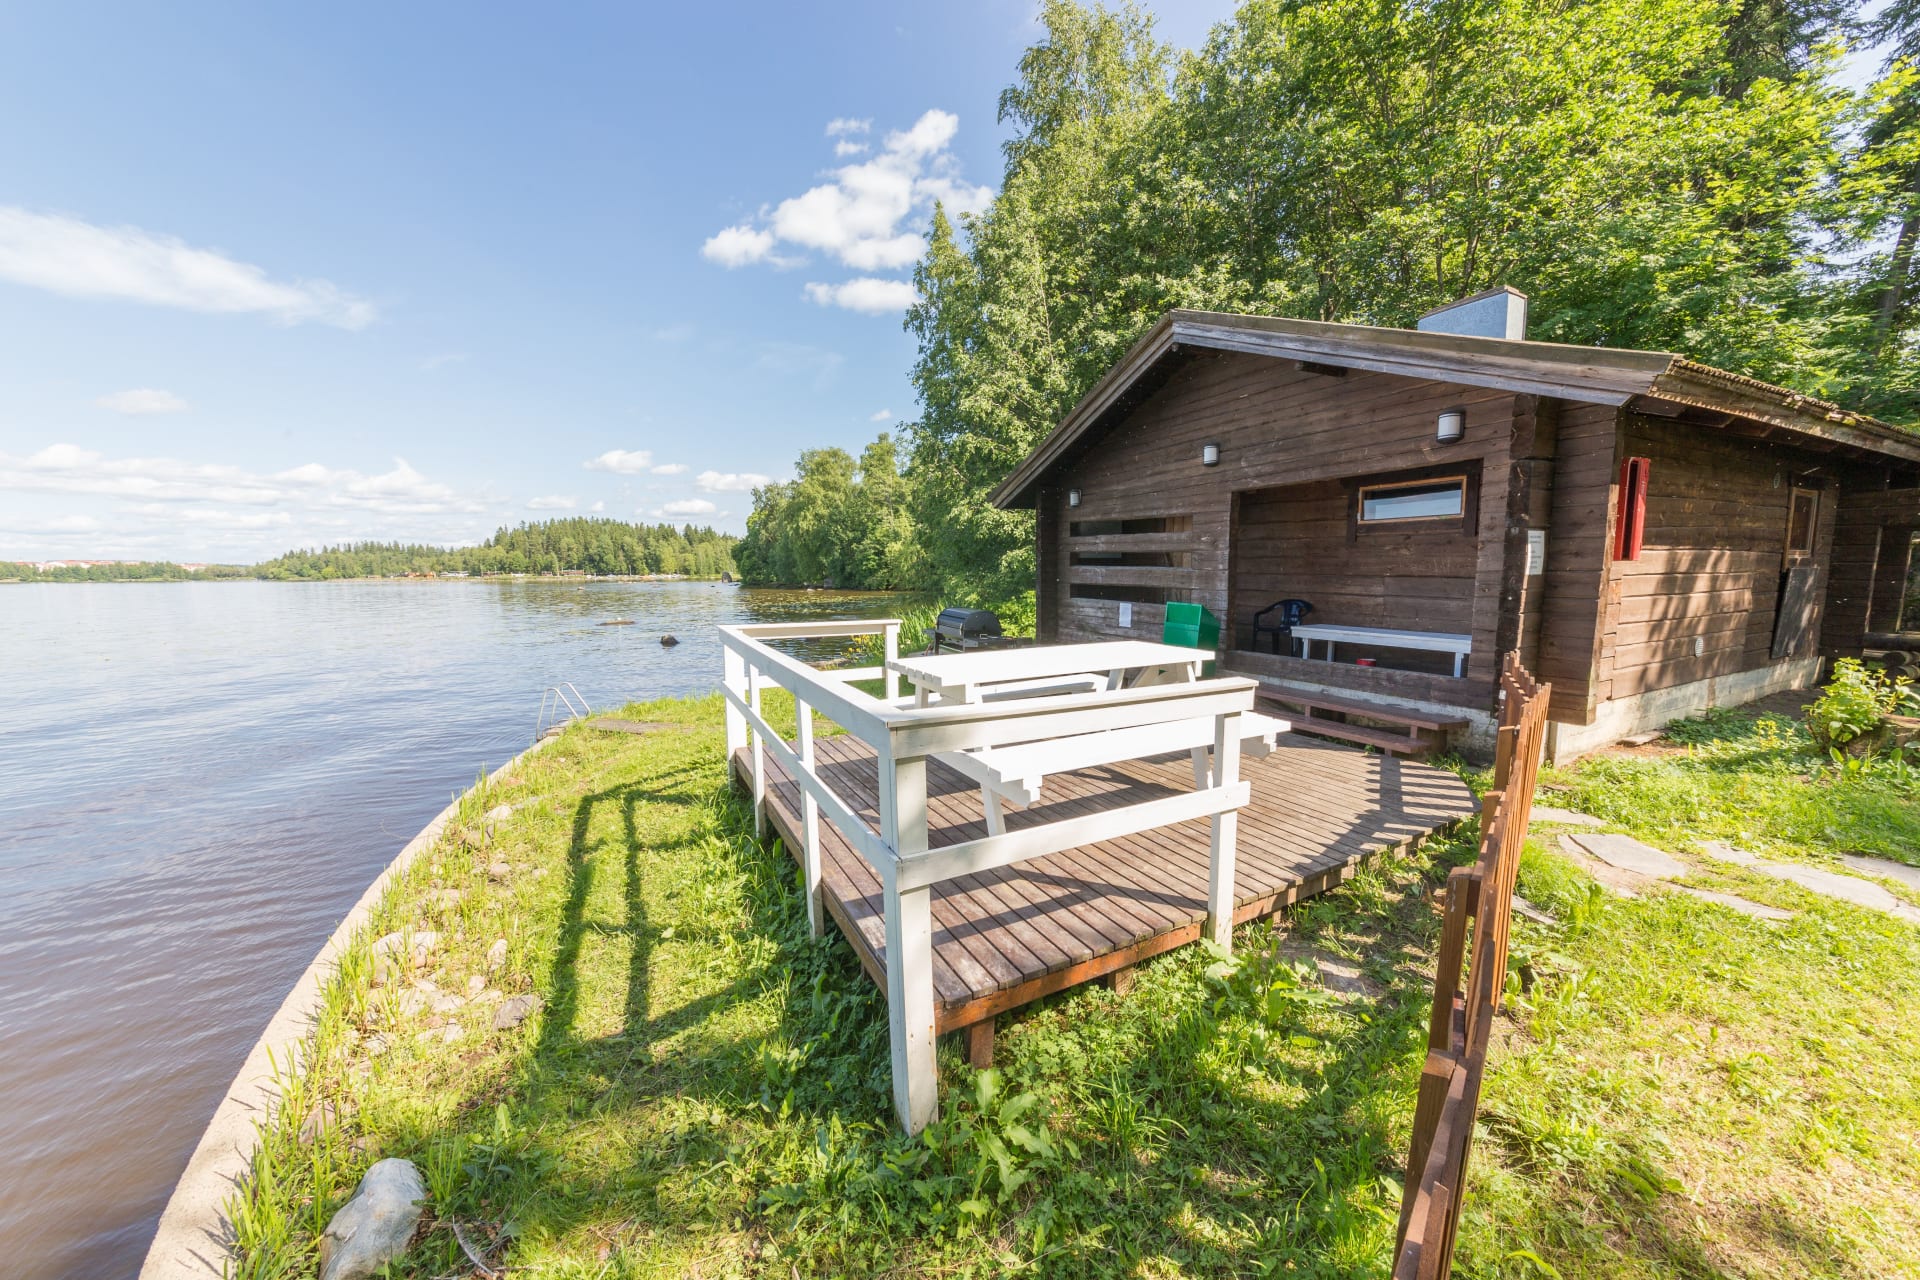 Rent a Finnish sauna with your friends or family in Härmälä Camping.